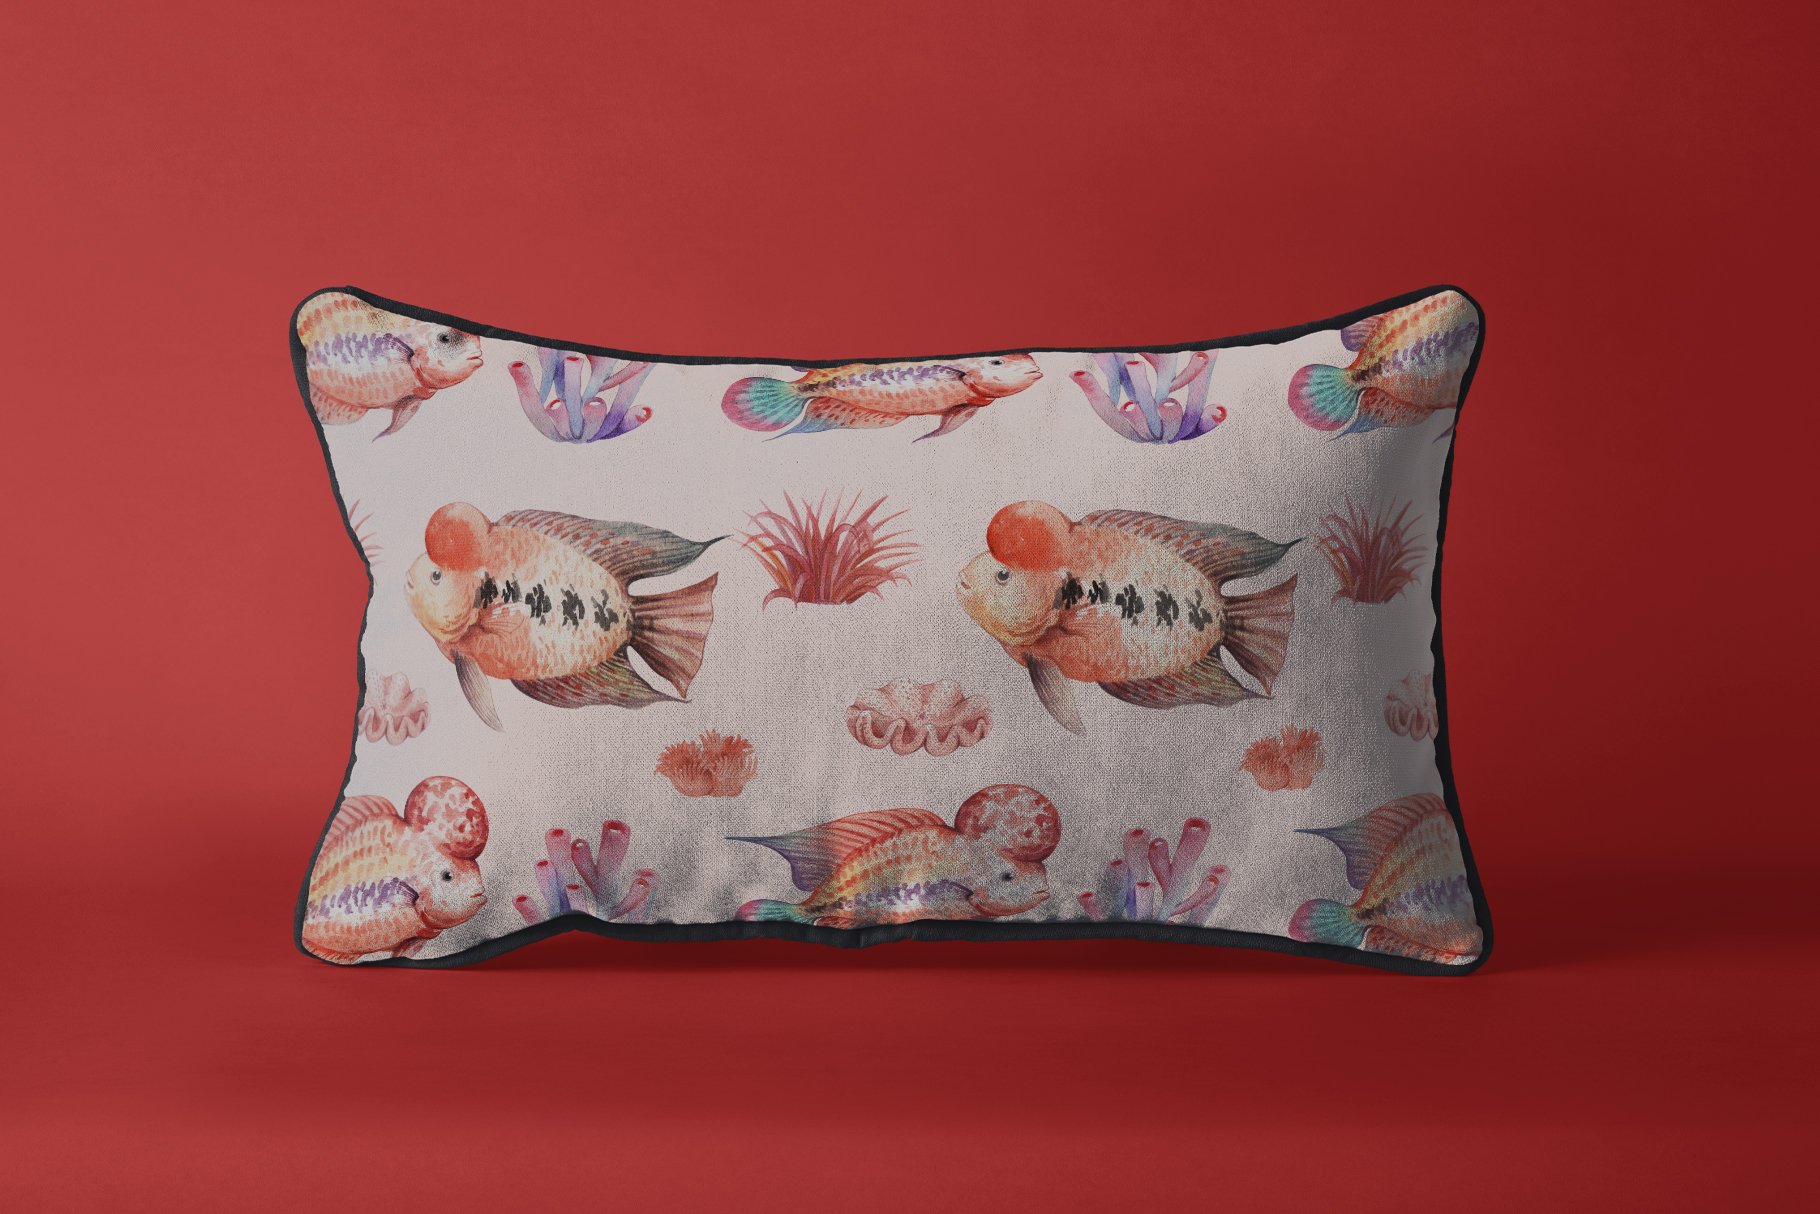 Cool red flower horn fishes pillow.